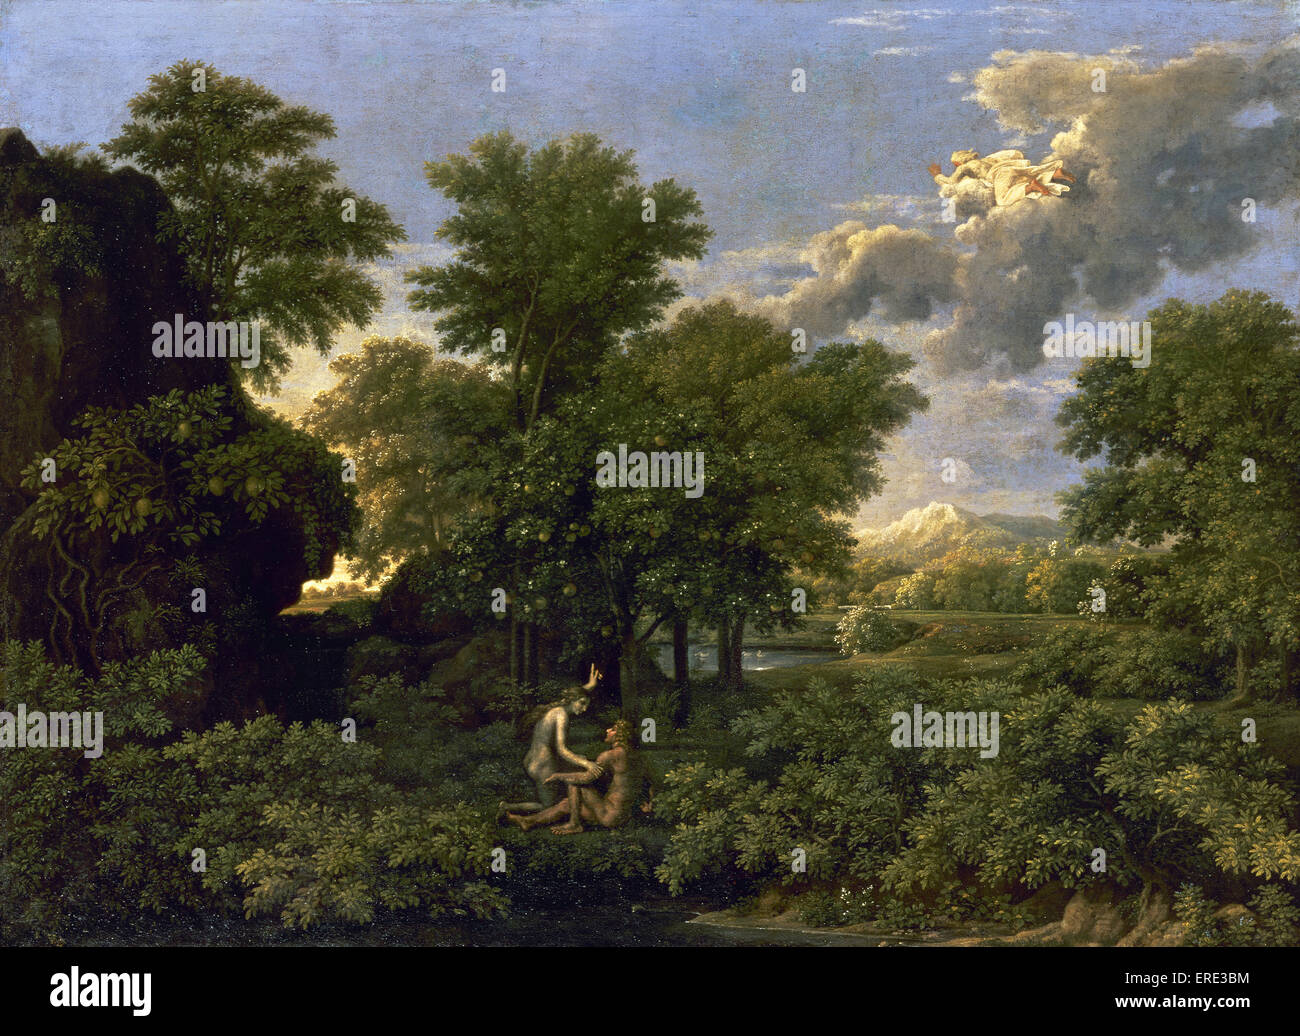 Nicolas Poussin (1594-1665). French painter. Spring (The Earthly Paradise). 1660. Classicism. Oil. Louvre Museum. Paris. France. Stock Photo